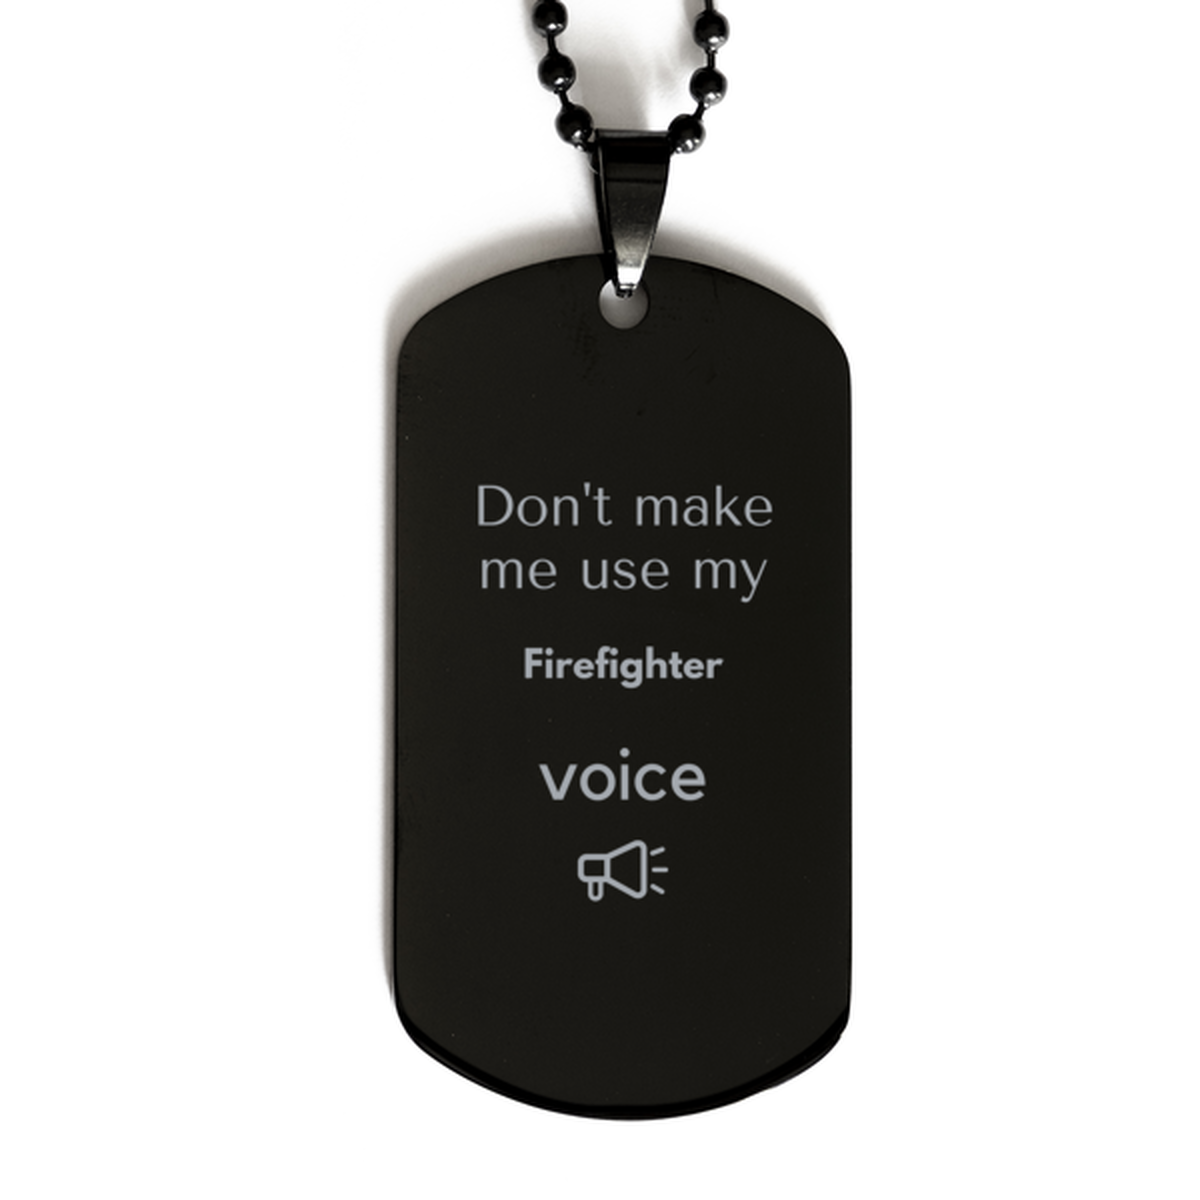 Don't make me use my Firefighter voice, Sarcasm Firefighter Gifts, Christmas Firefighter Black Dog Tag Birthday Unique Gifts For Firefighter Coworkers, Men, Women, Colleague, Friends